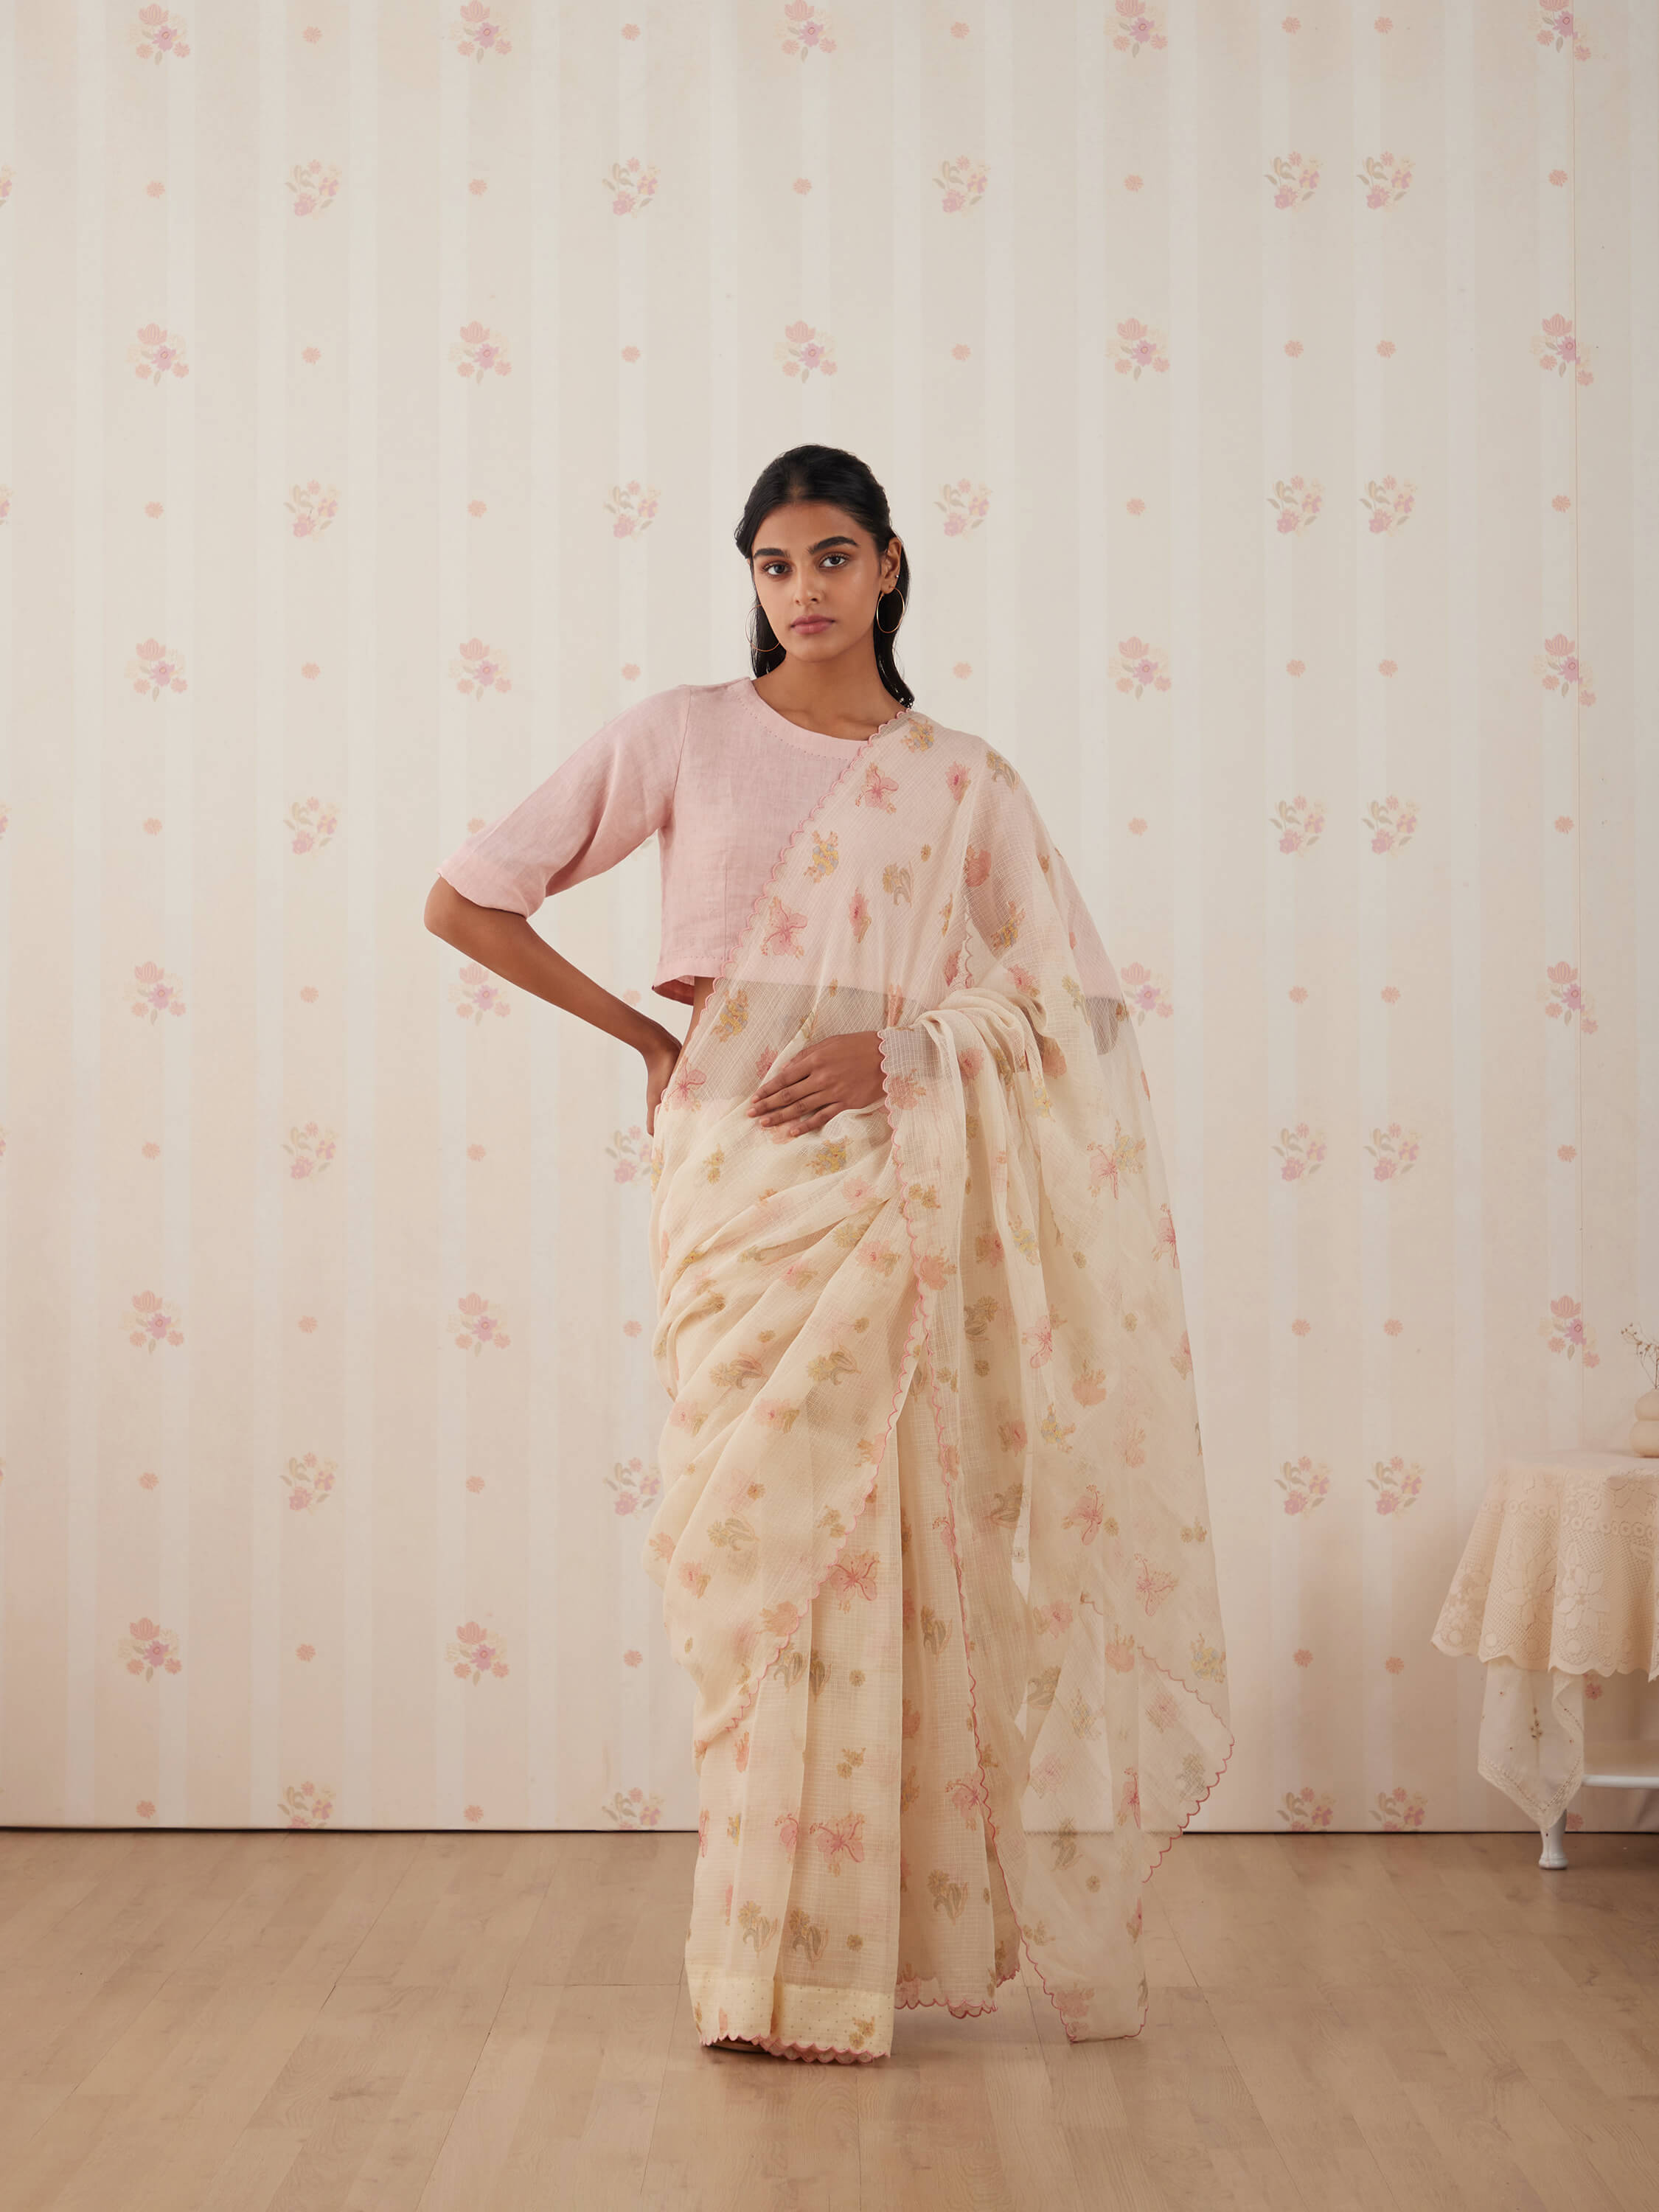 Woman in elegant floral saree and pink blouse posing indoors.